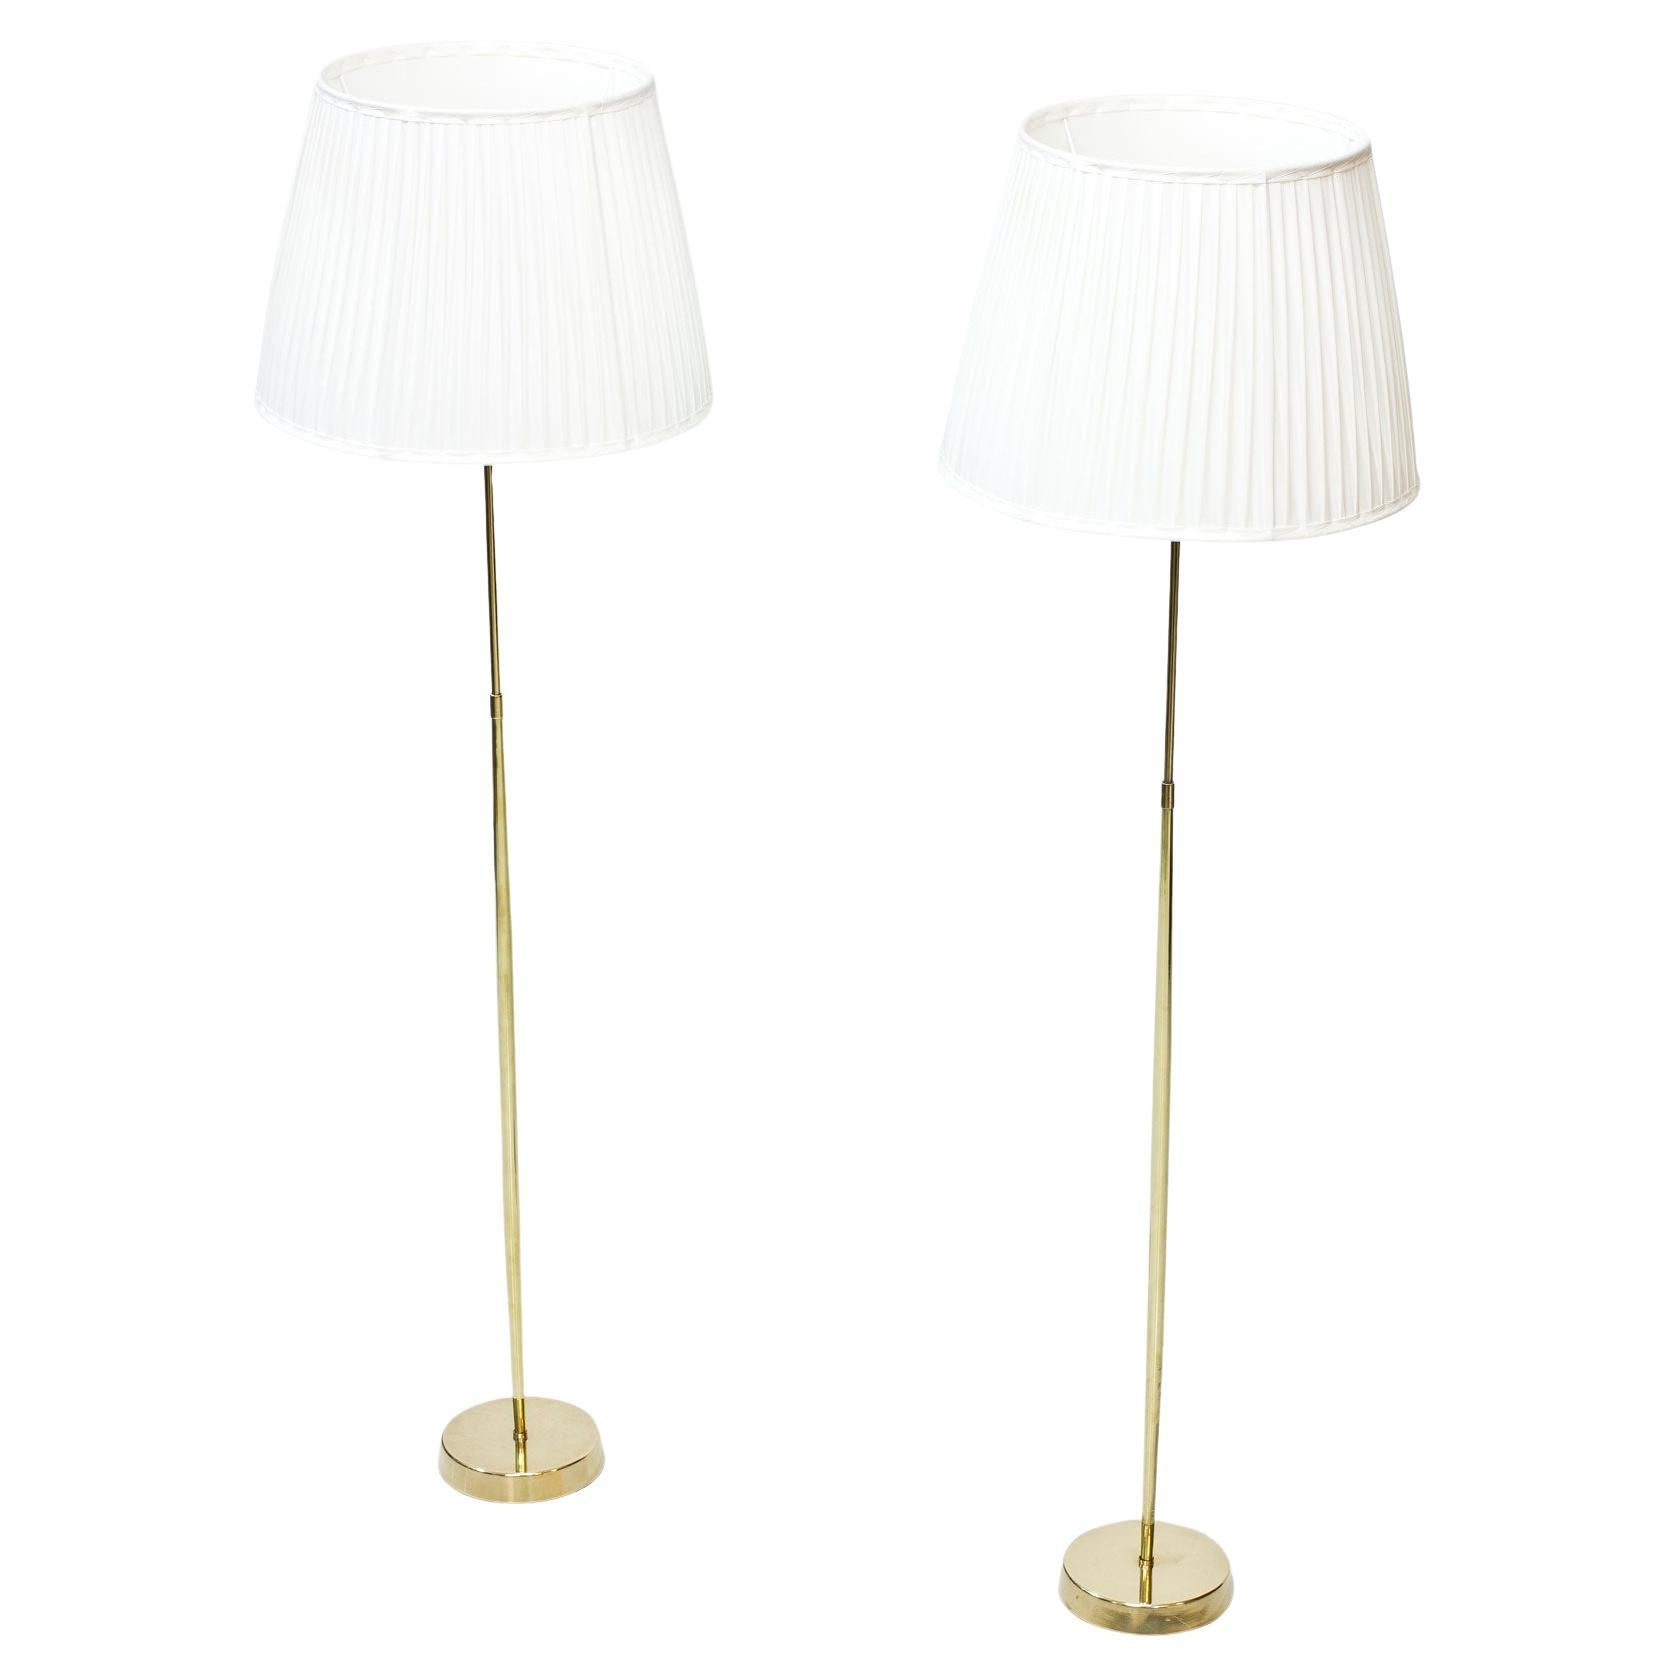 Pair of ASEA Belysning Brass Floor Lamps, 1950s, Hand-Pleated Chintz Shades